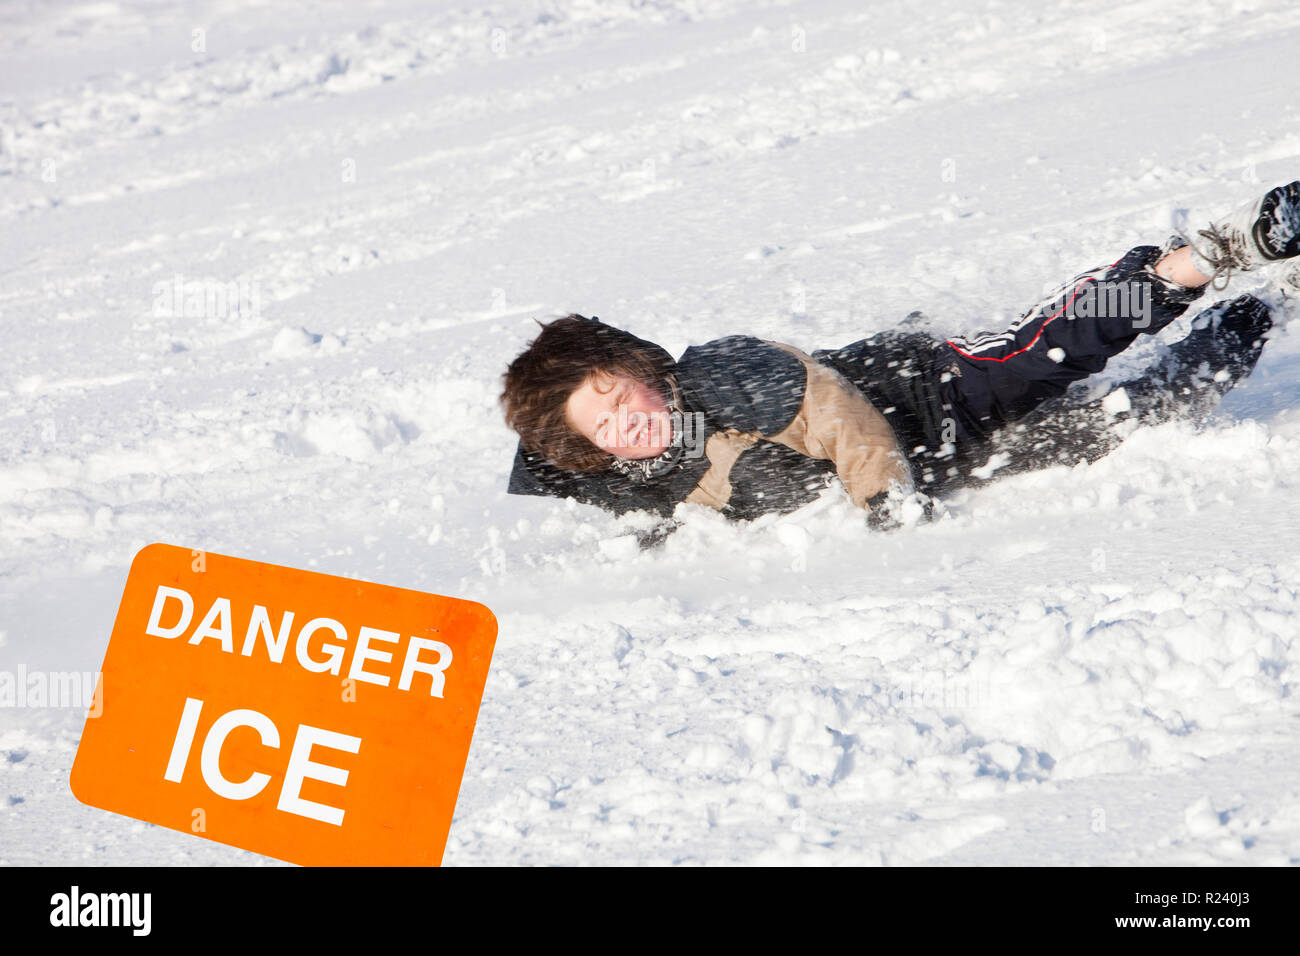 A young boy falling over in the snow, UK. Stock Photo